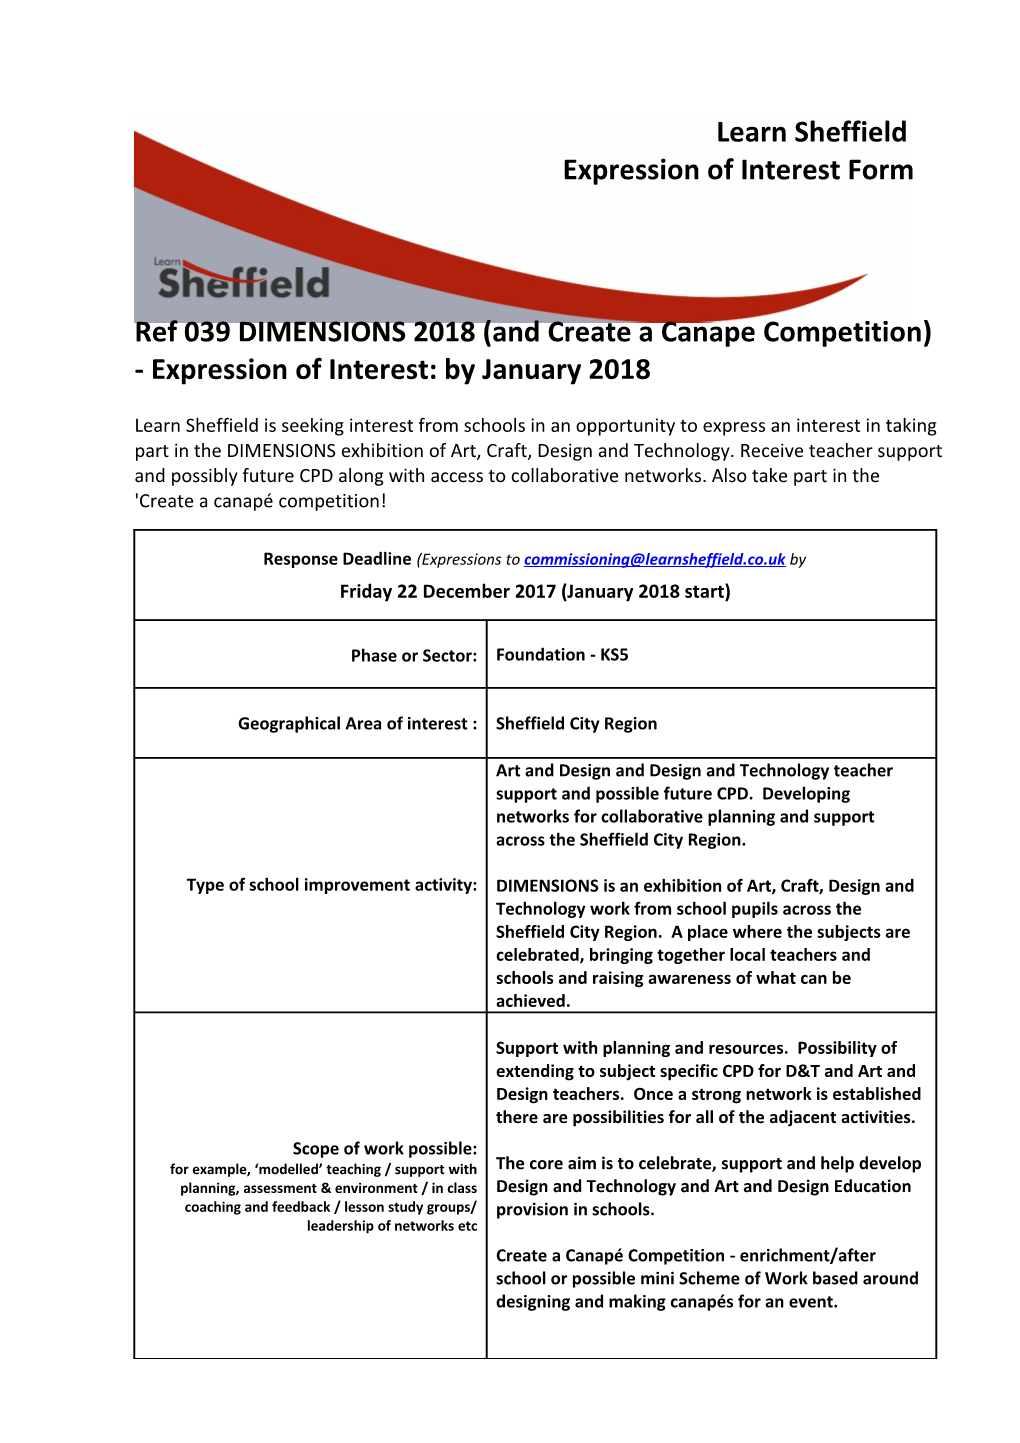 Ref 039DIMENSIONS 2018(And Create a Canape Competition) - Expression of Interest: by January